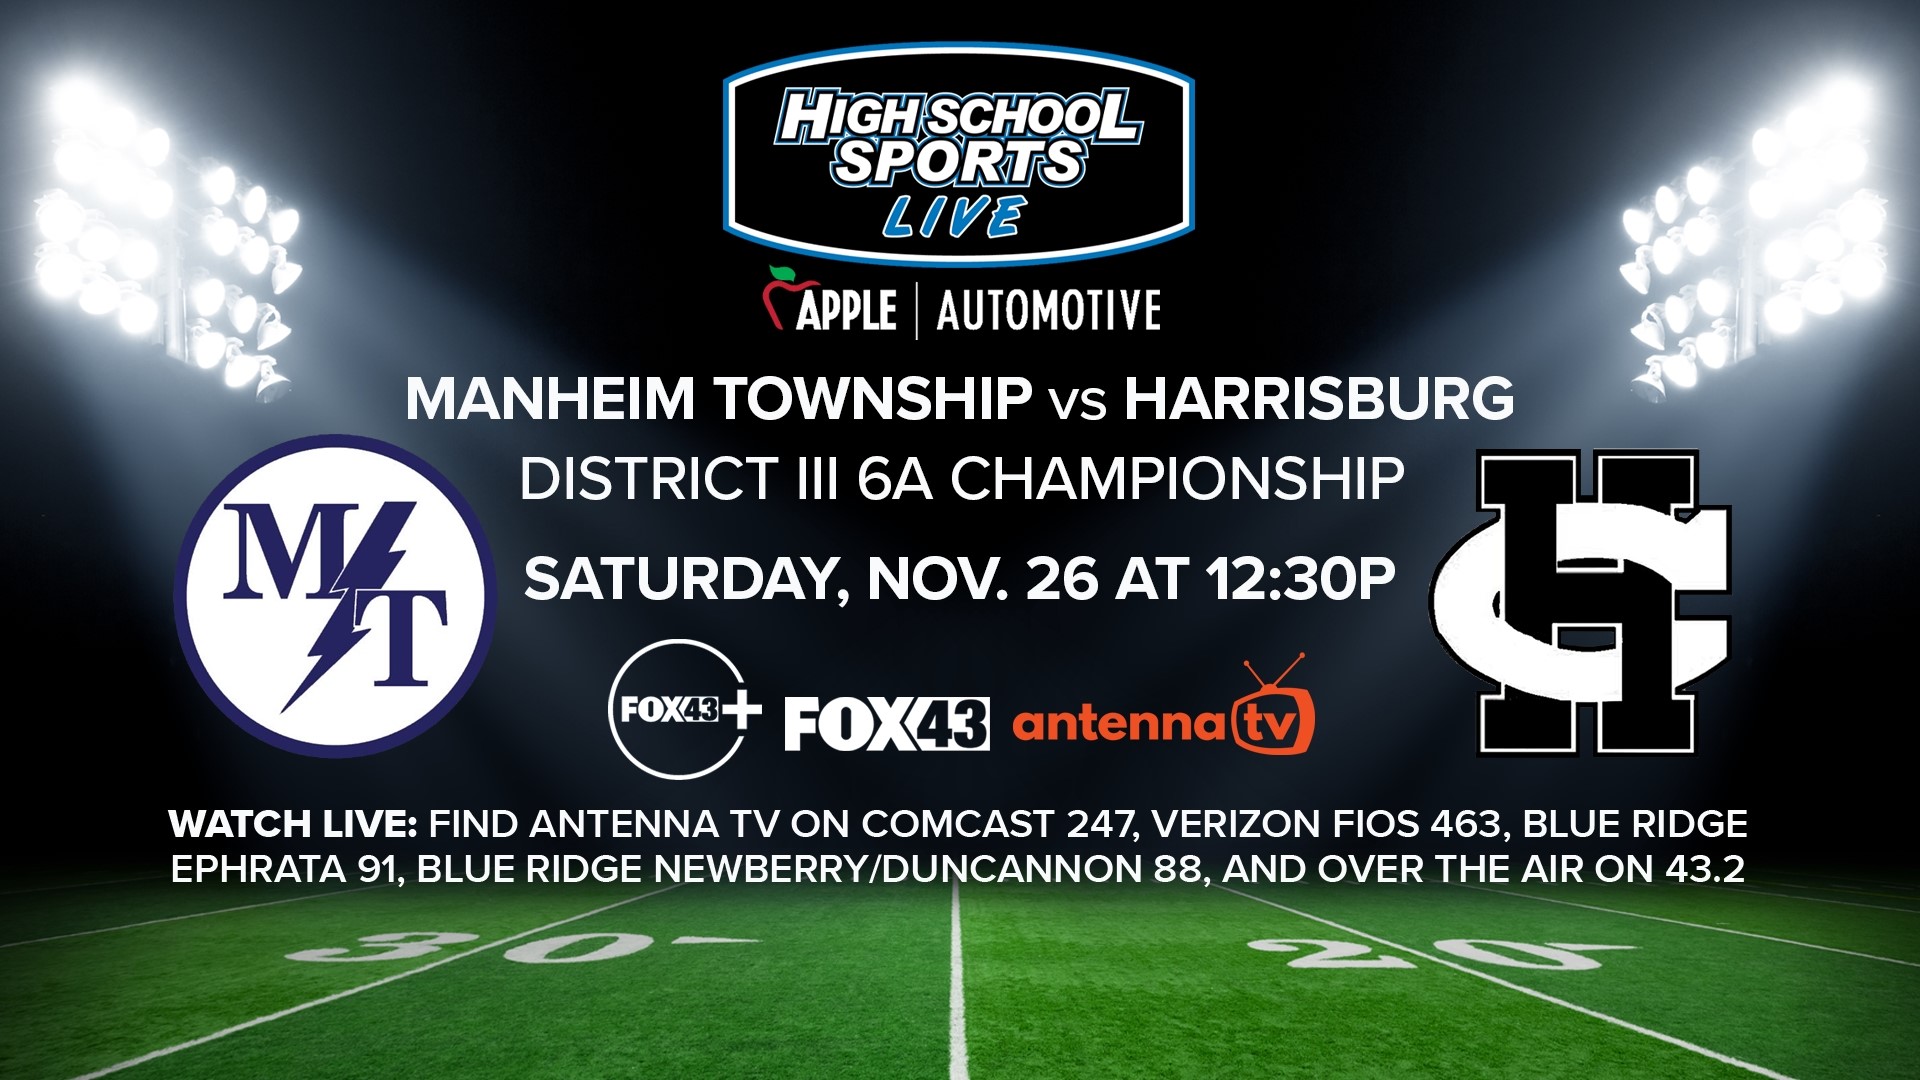 Manheim Township takes on Harrisburg in the 2022 District III 6A Championship on Nov. 26, 2022.